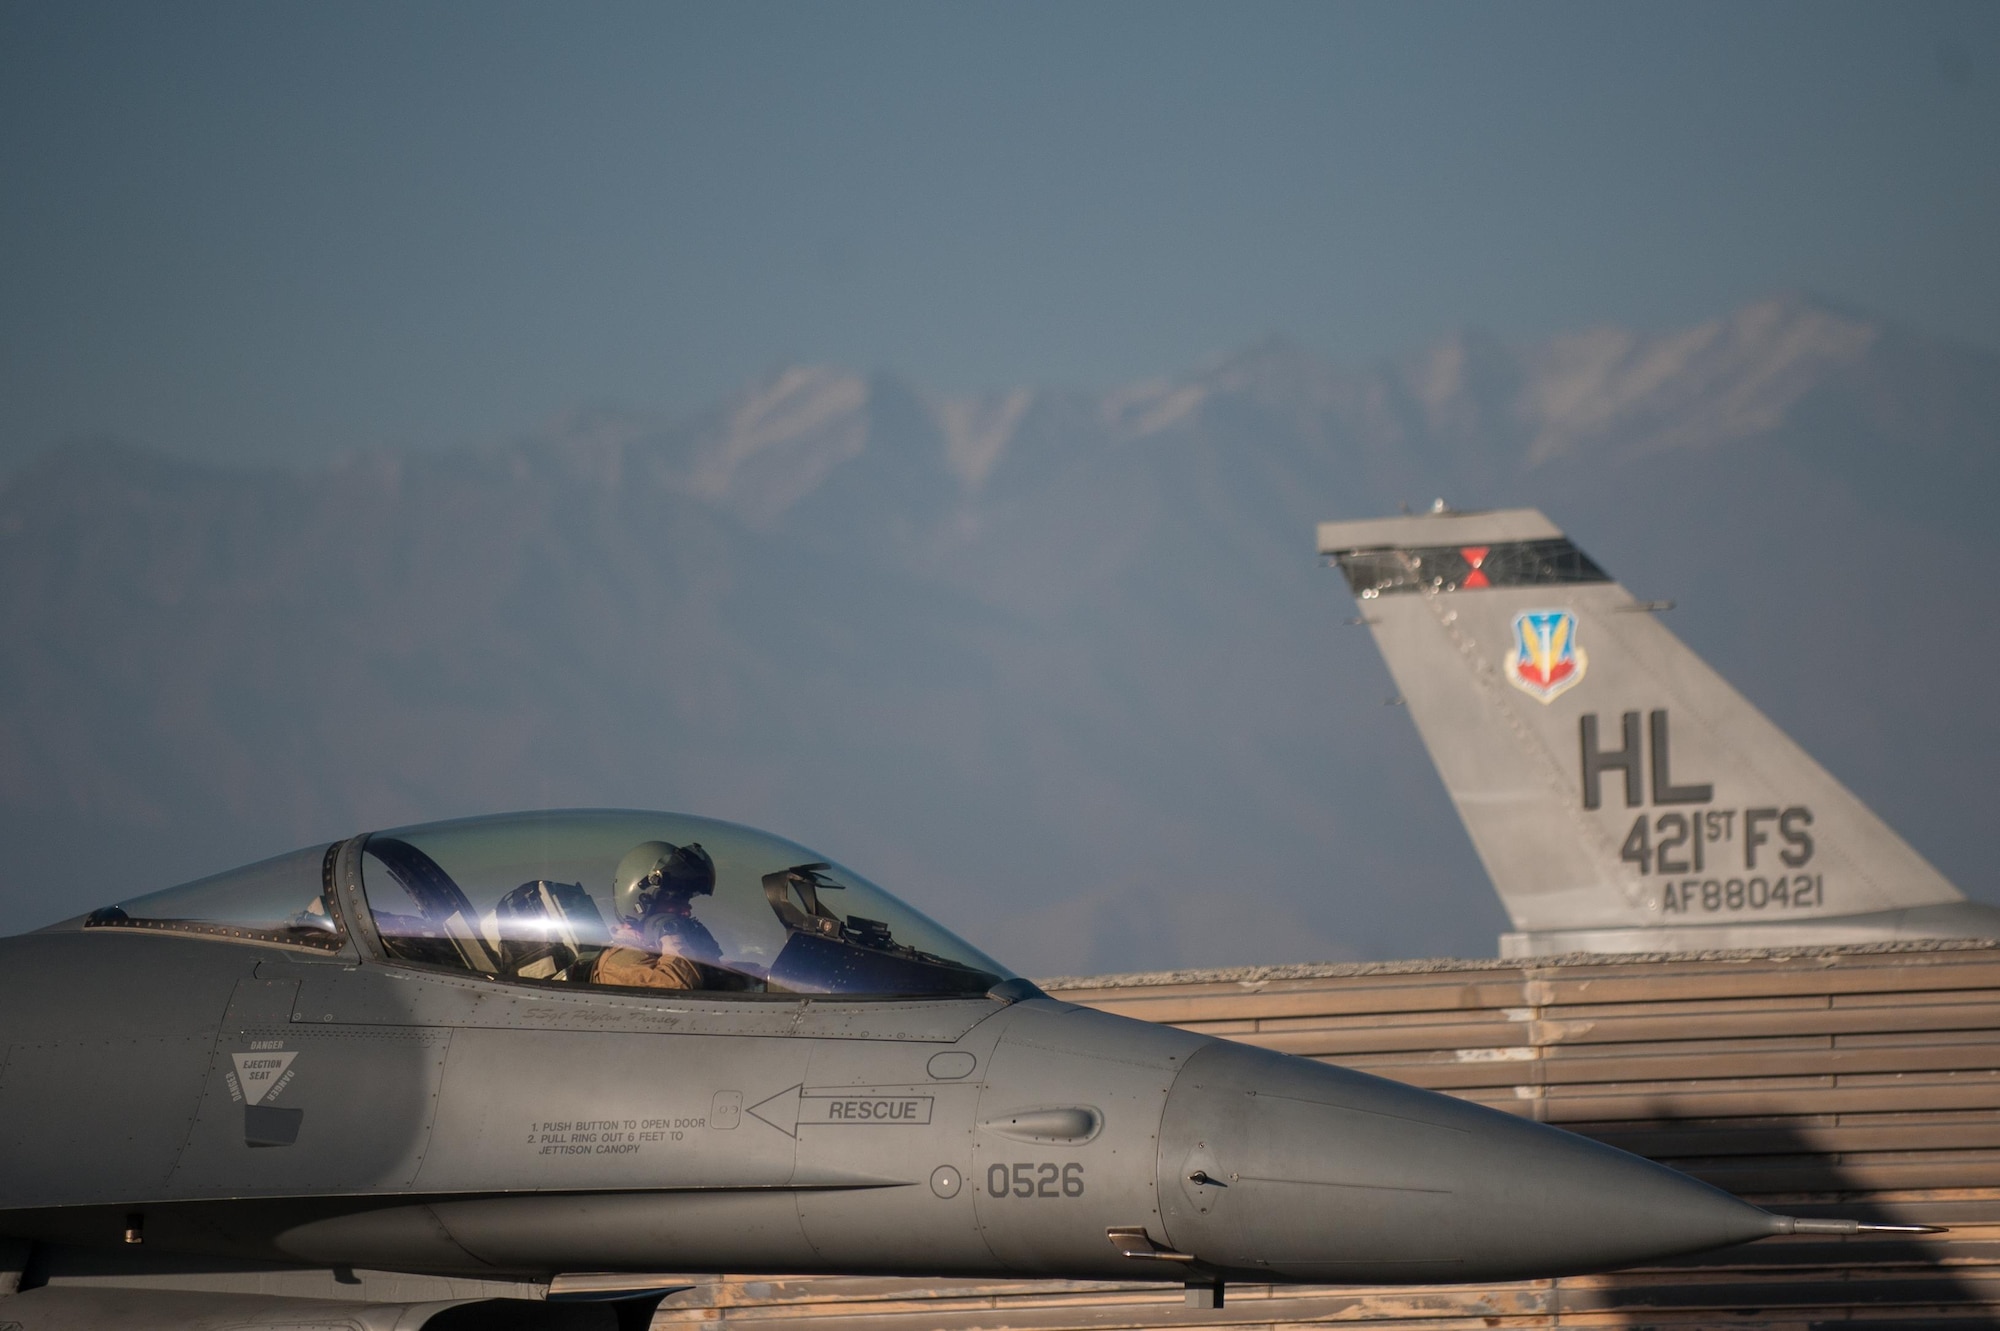 Lt. Col. Michael Meyer, 421st Expeditionary Fighter Squadron commander, deployed from Hill Air Force Base, Utah, performs pre-flight checks on an F-16 Fighting Falcon at Bagram Airfield, Afghanistan, Oct. 30, 2015. Airmen assigned to the 421st FS, known as the “Black Widows,” arrived here Oct. 28, 2015 in support of Operation Freedom’s Sentinel and NATO’s Resolute Support mission. (U.S. Air Force photo by Tech. Sgt. Joseph Swafford/Released)